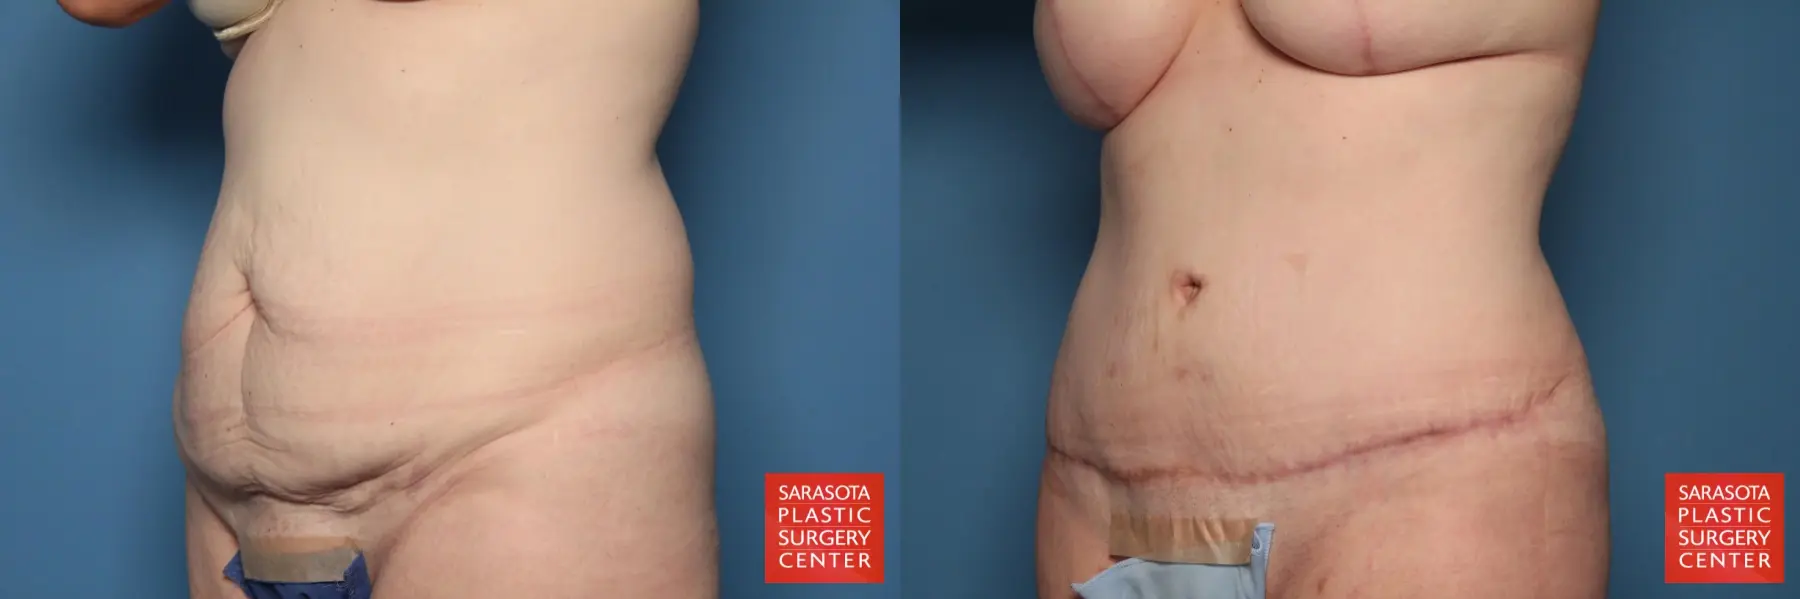 Tummy Tuck: Patient 17 - Before and After 2